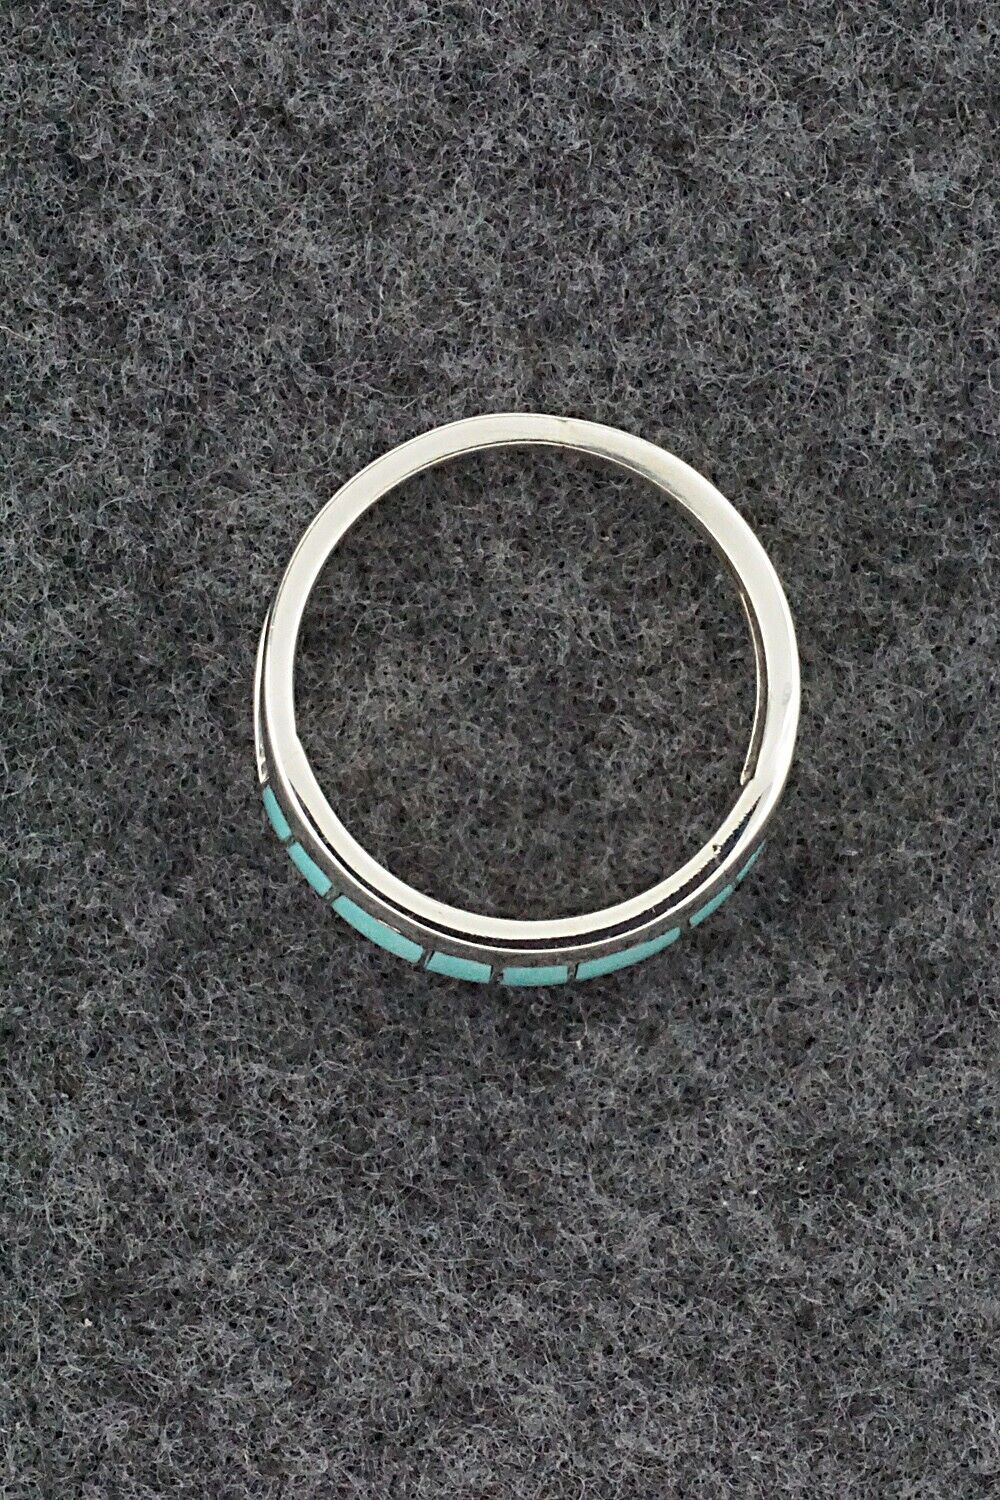 Turquoise & Sterling Silver Inlay Ring - Sibert Bowannie - Size 9.5